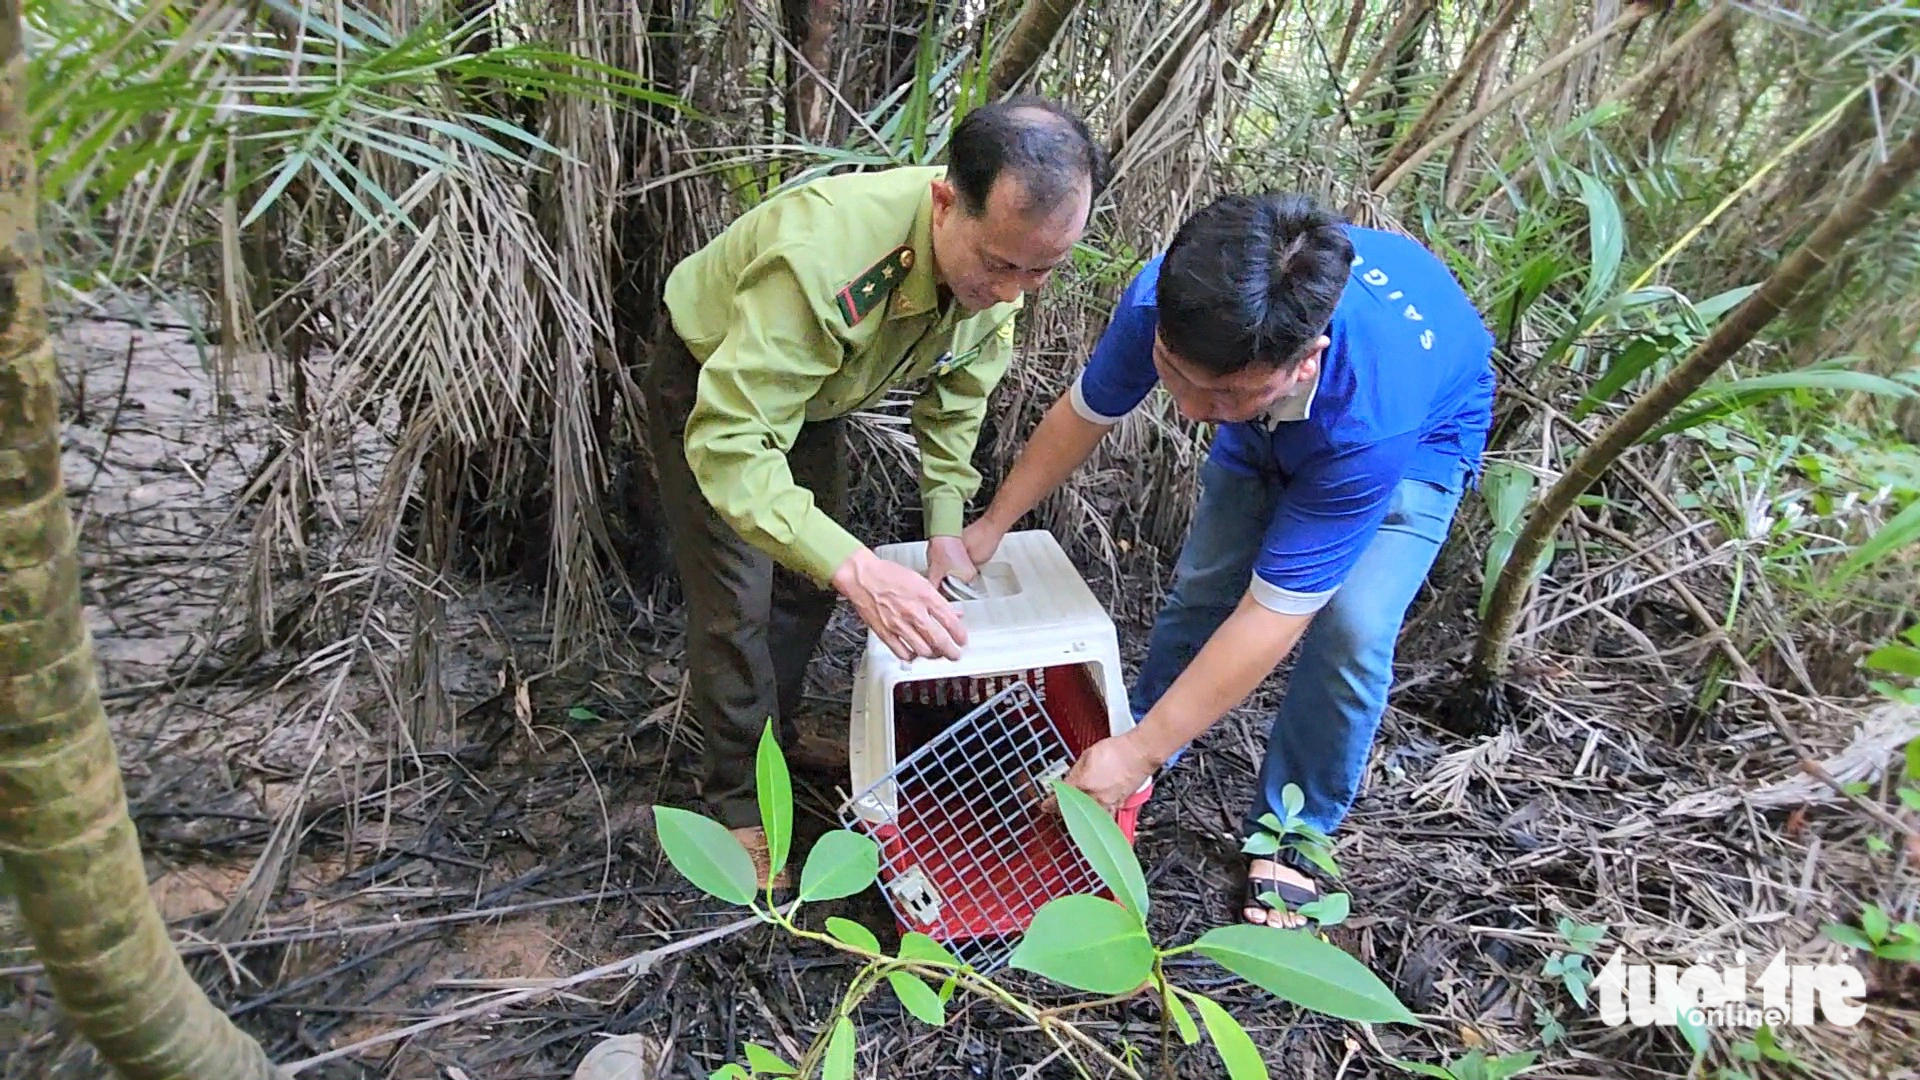 The otter is released to it’s natural habitat in a protected forest in the outlying district of Can Gio, Ho Chi Minh City. Photo: Ngoc Khai / Tuoi Tre